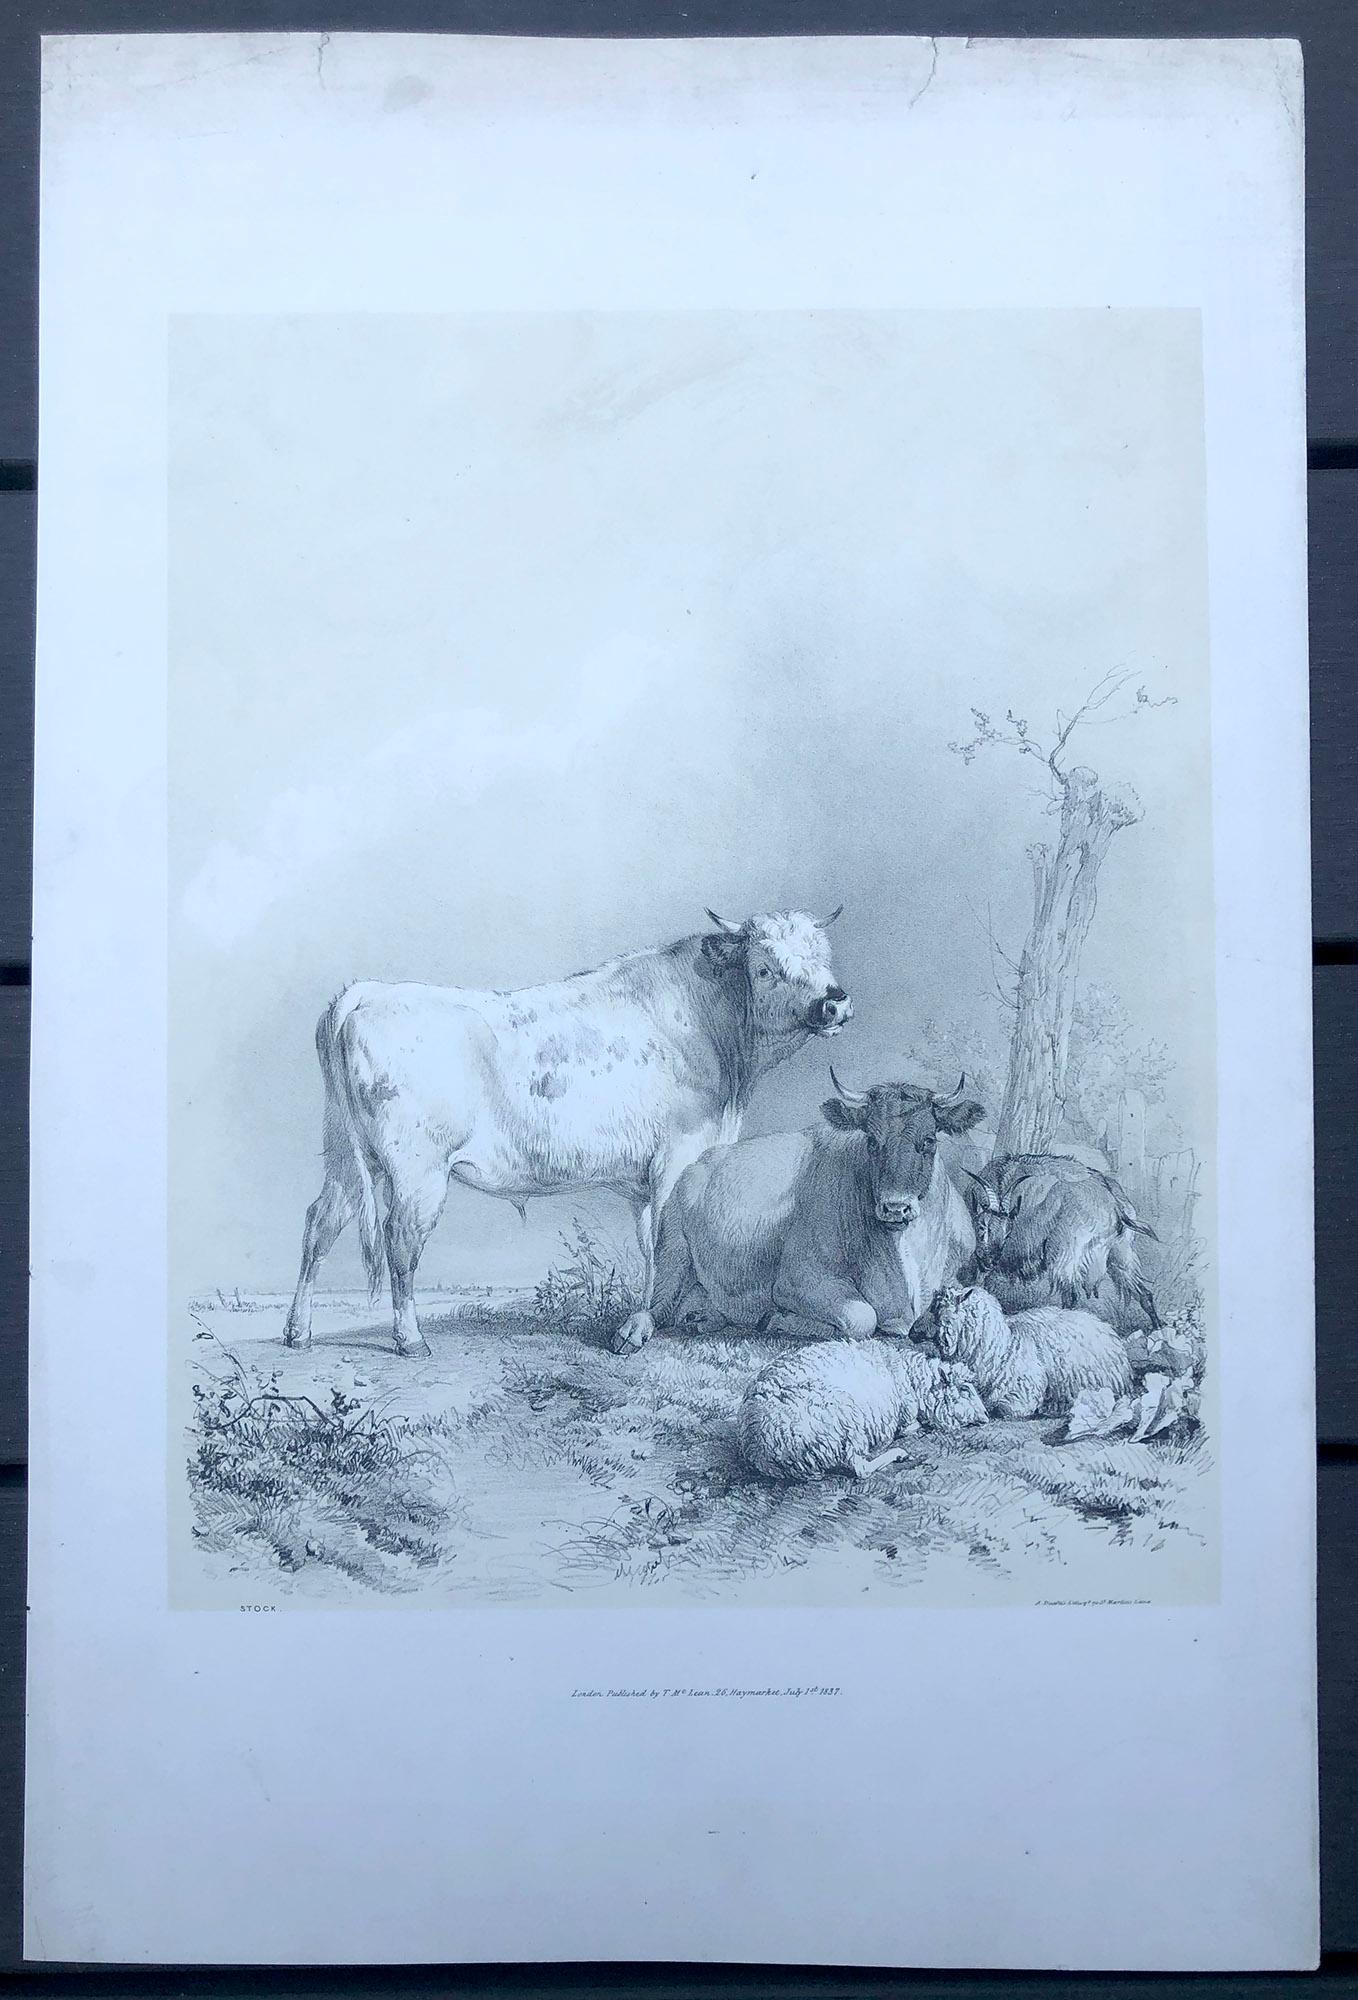 Tinted lithograph with white highlights, from 'Thirty-Four Subjects of Cattle', published in 1837 by Thos. McLean, Ackermann and Tilt. Printed at A Ducote's Lithographic Establishment. 

Cooper was an English painter and lithographer noted for his